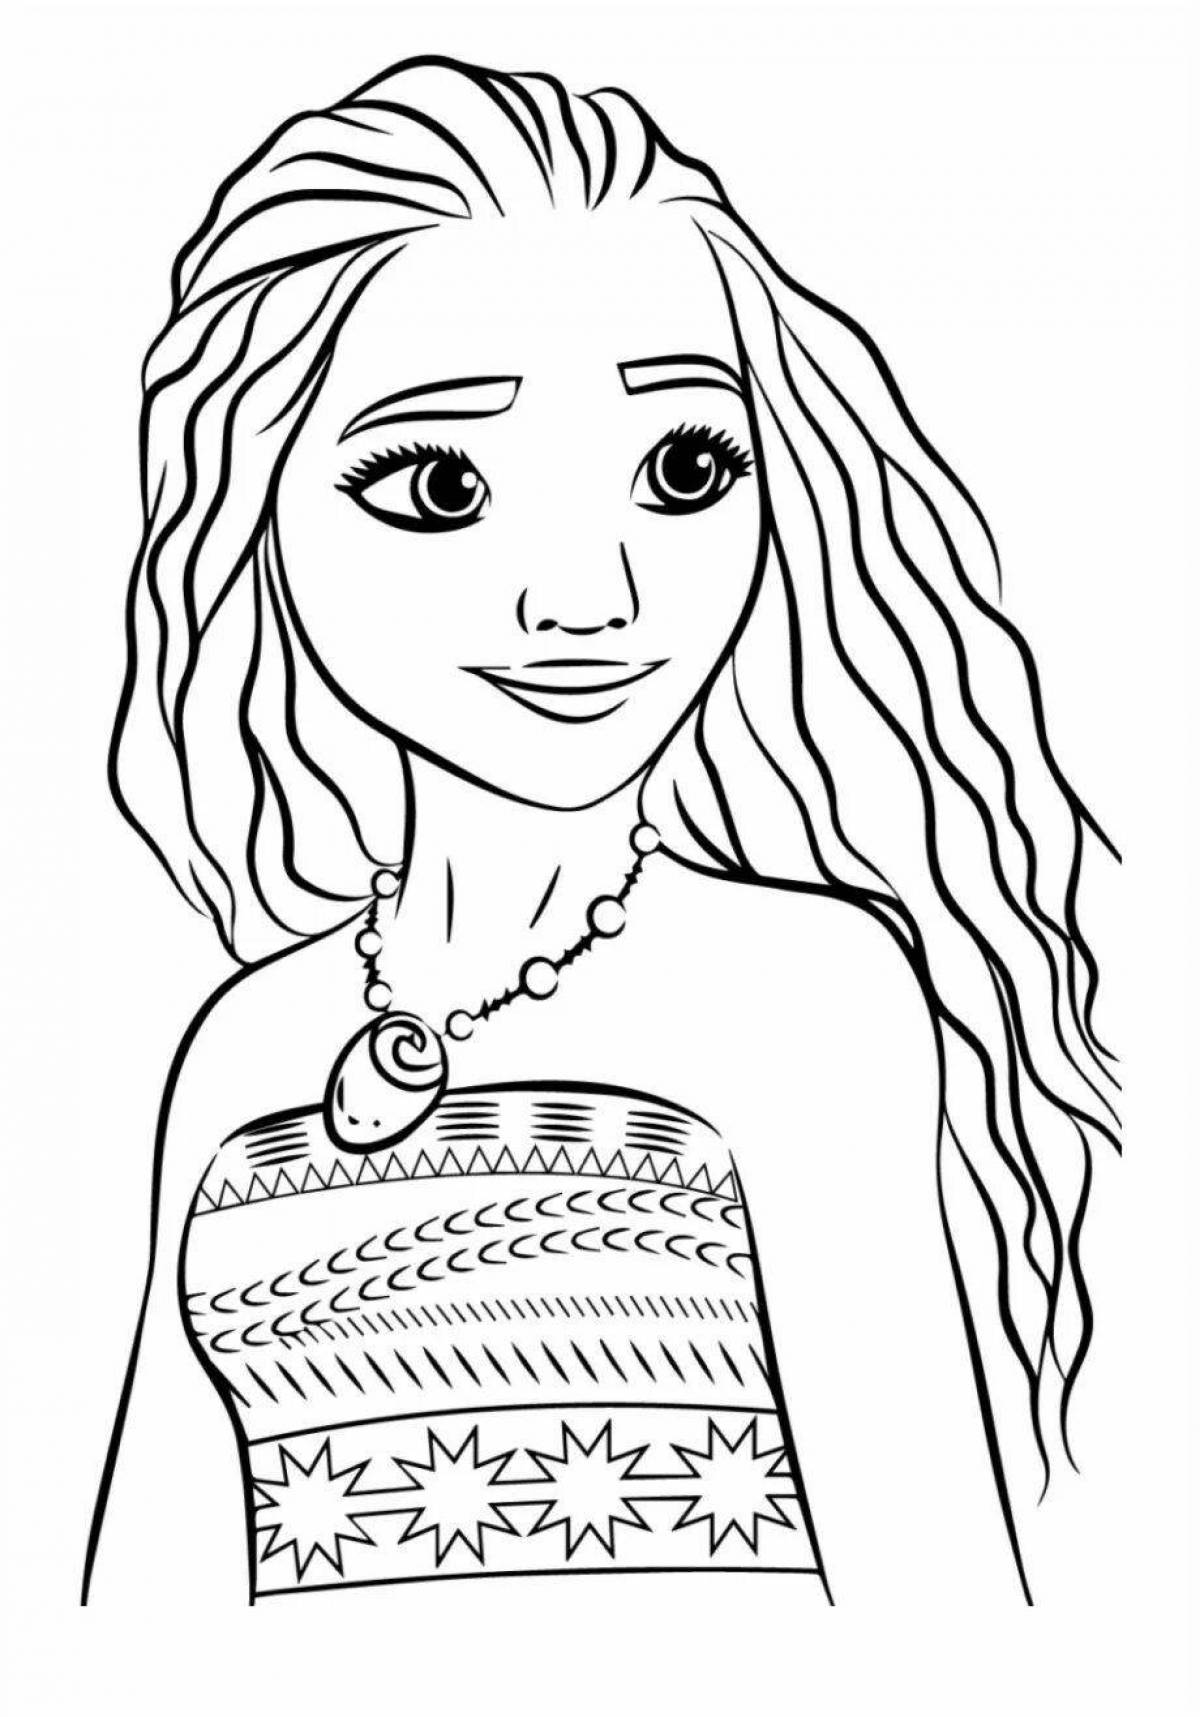 Moana play coloring for kids